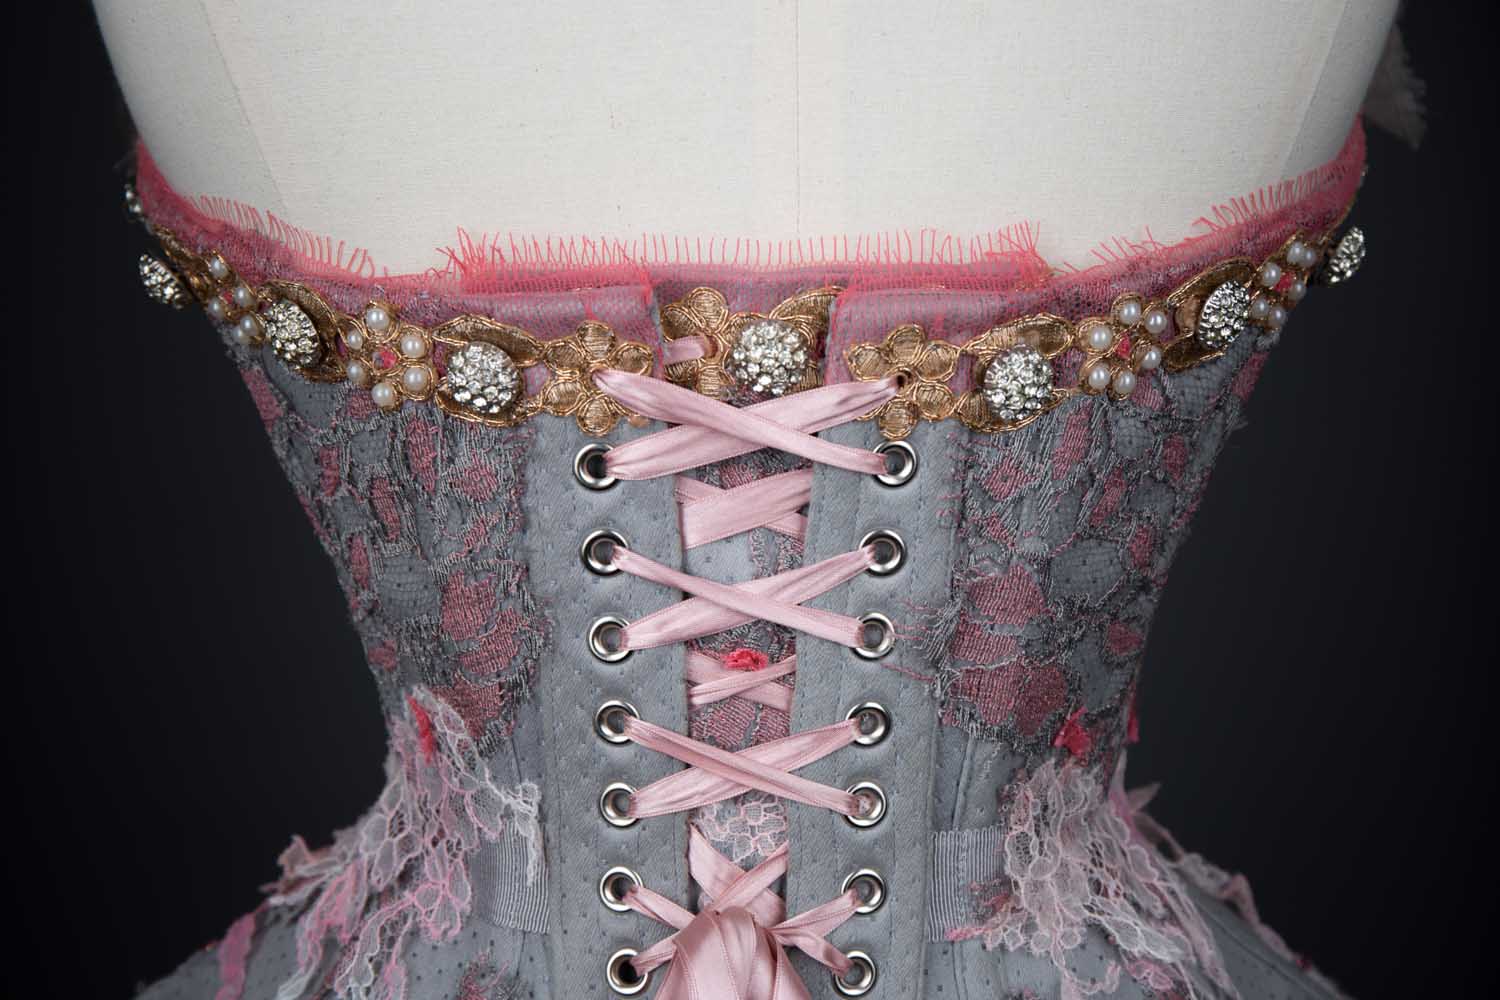 'Babes In Joyland' Collaborative Wedding Corset By Pop Antique. The Underpinnings Museum. Photography by Tigz Rice